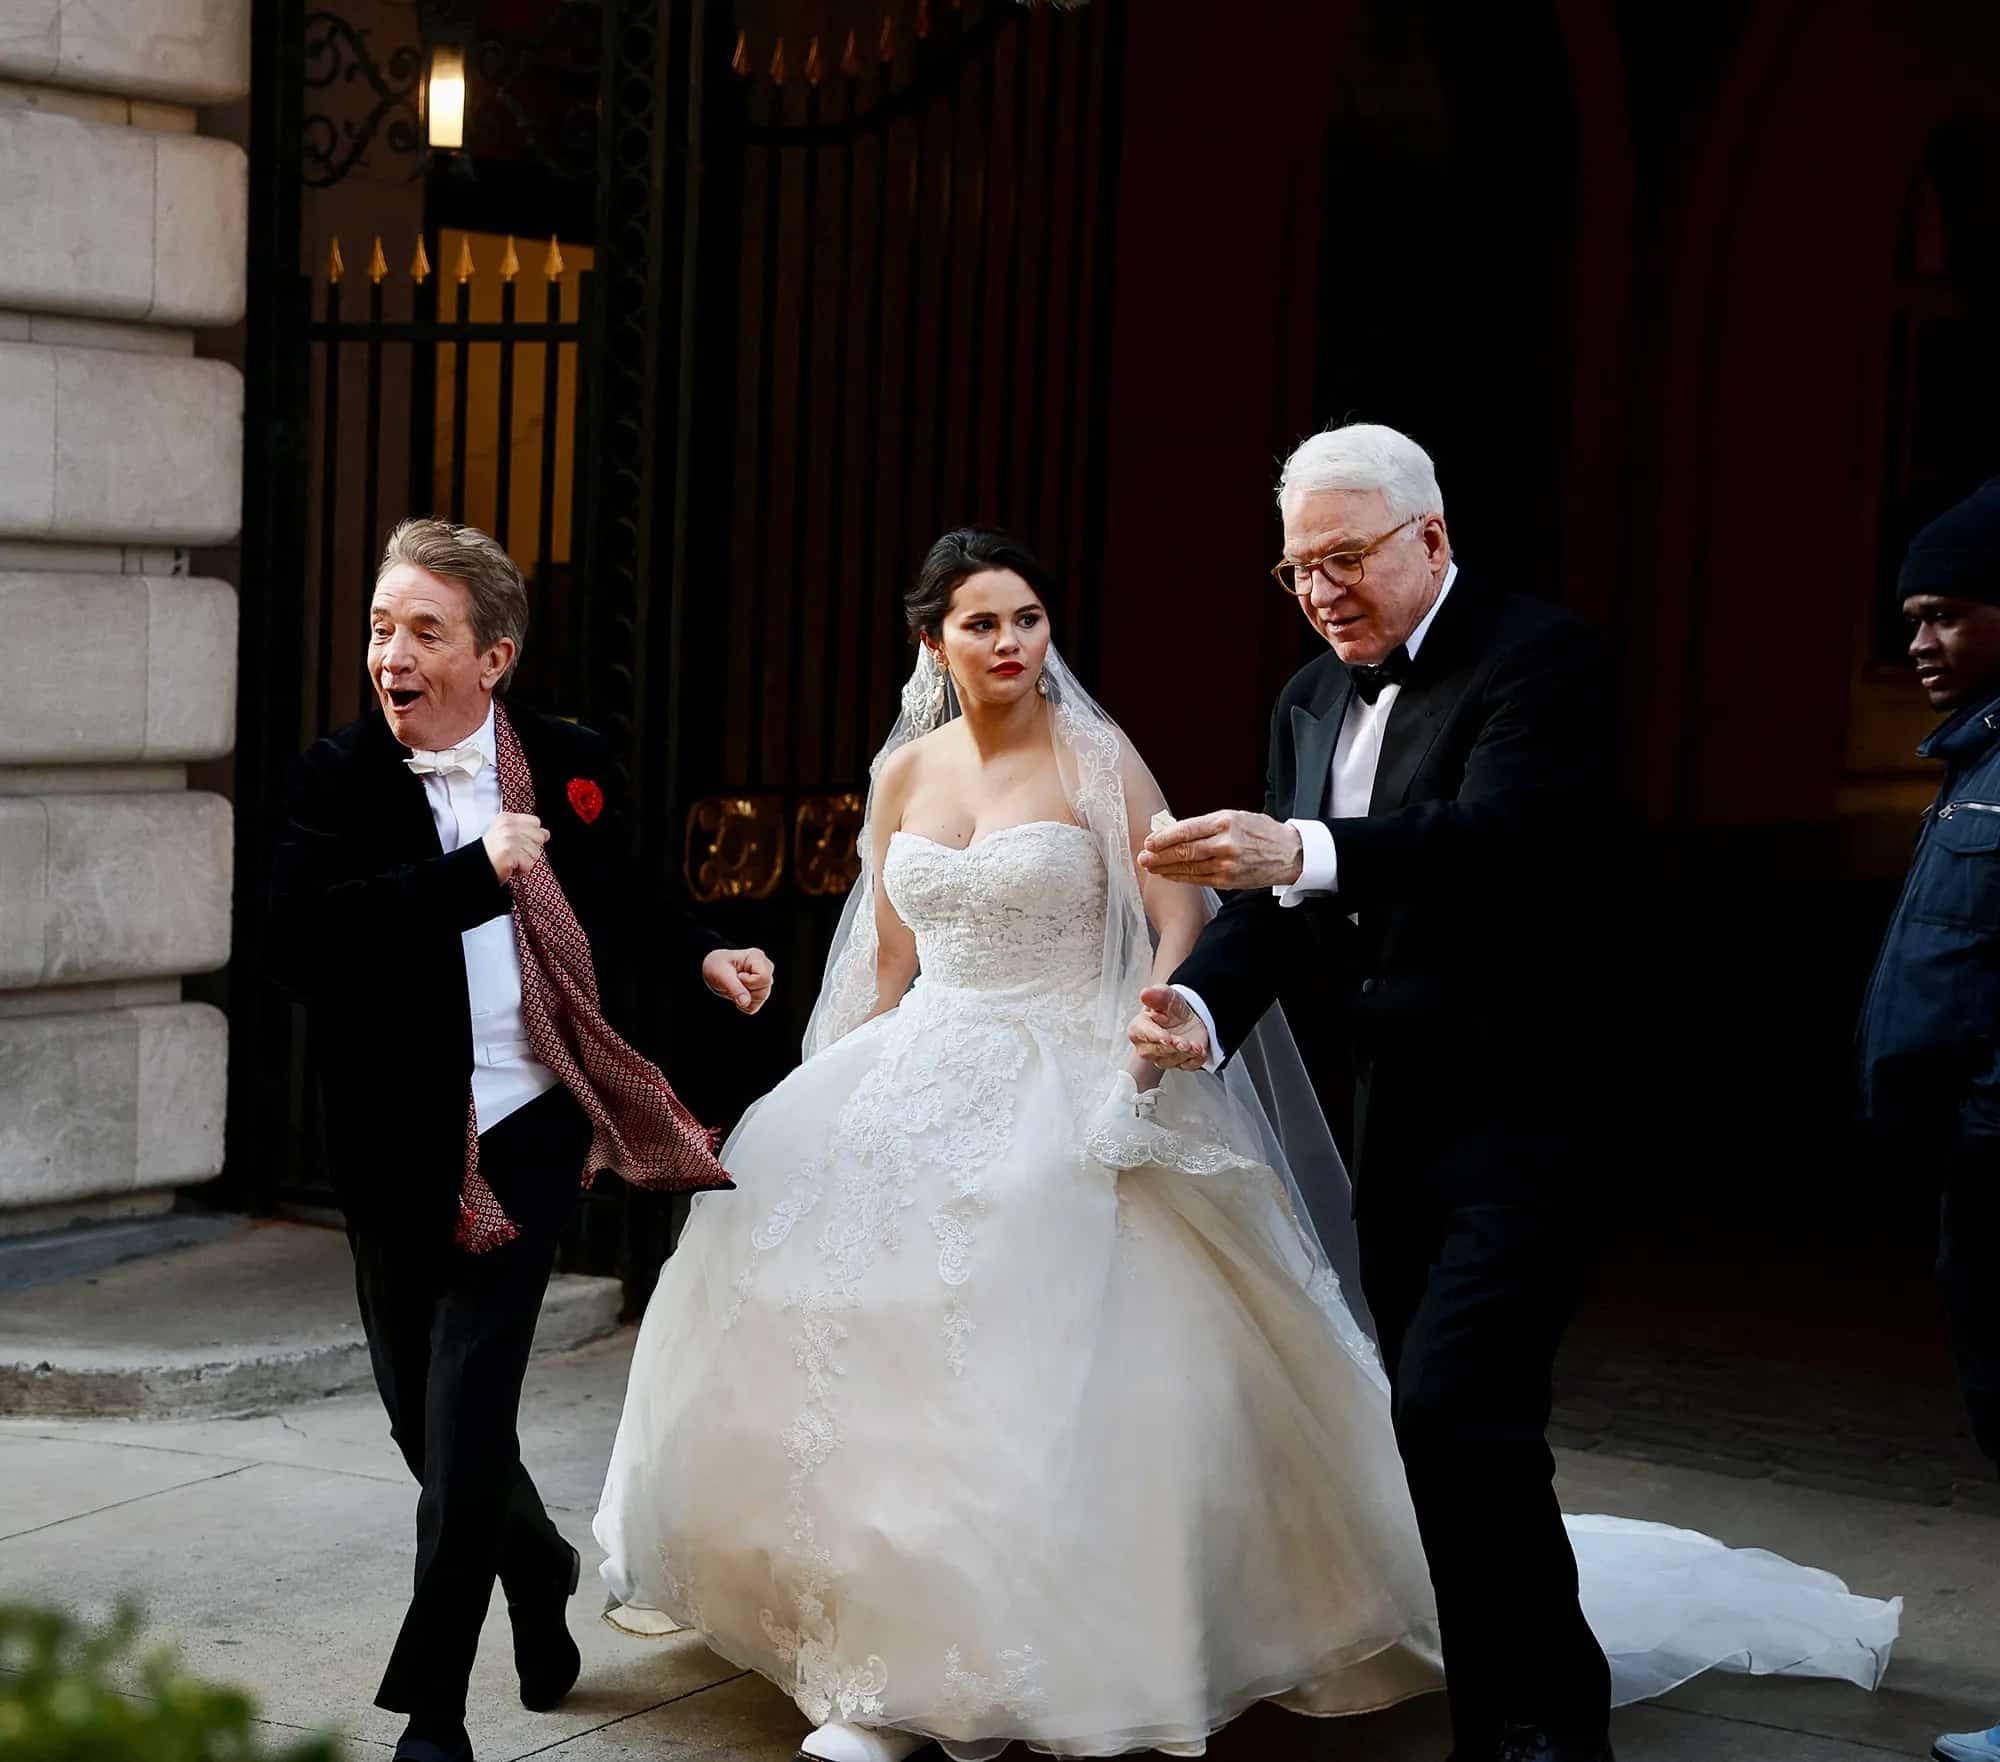 Mabel in a wedding gown accompanied by Oliver and Charles in tuxedos in this image from 20th Century Fox Television